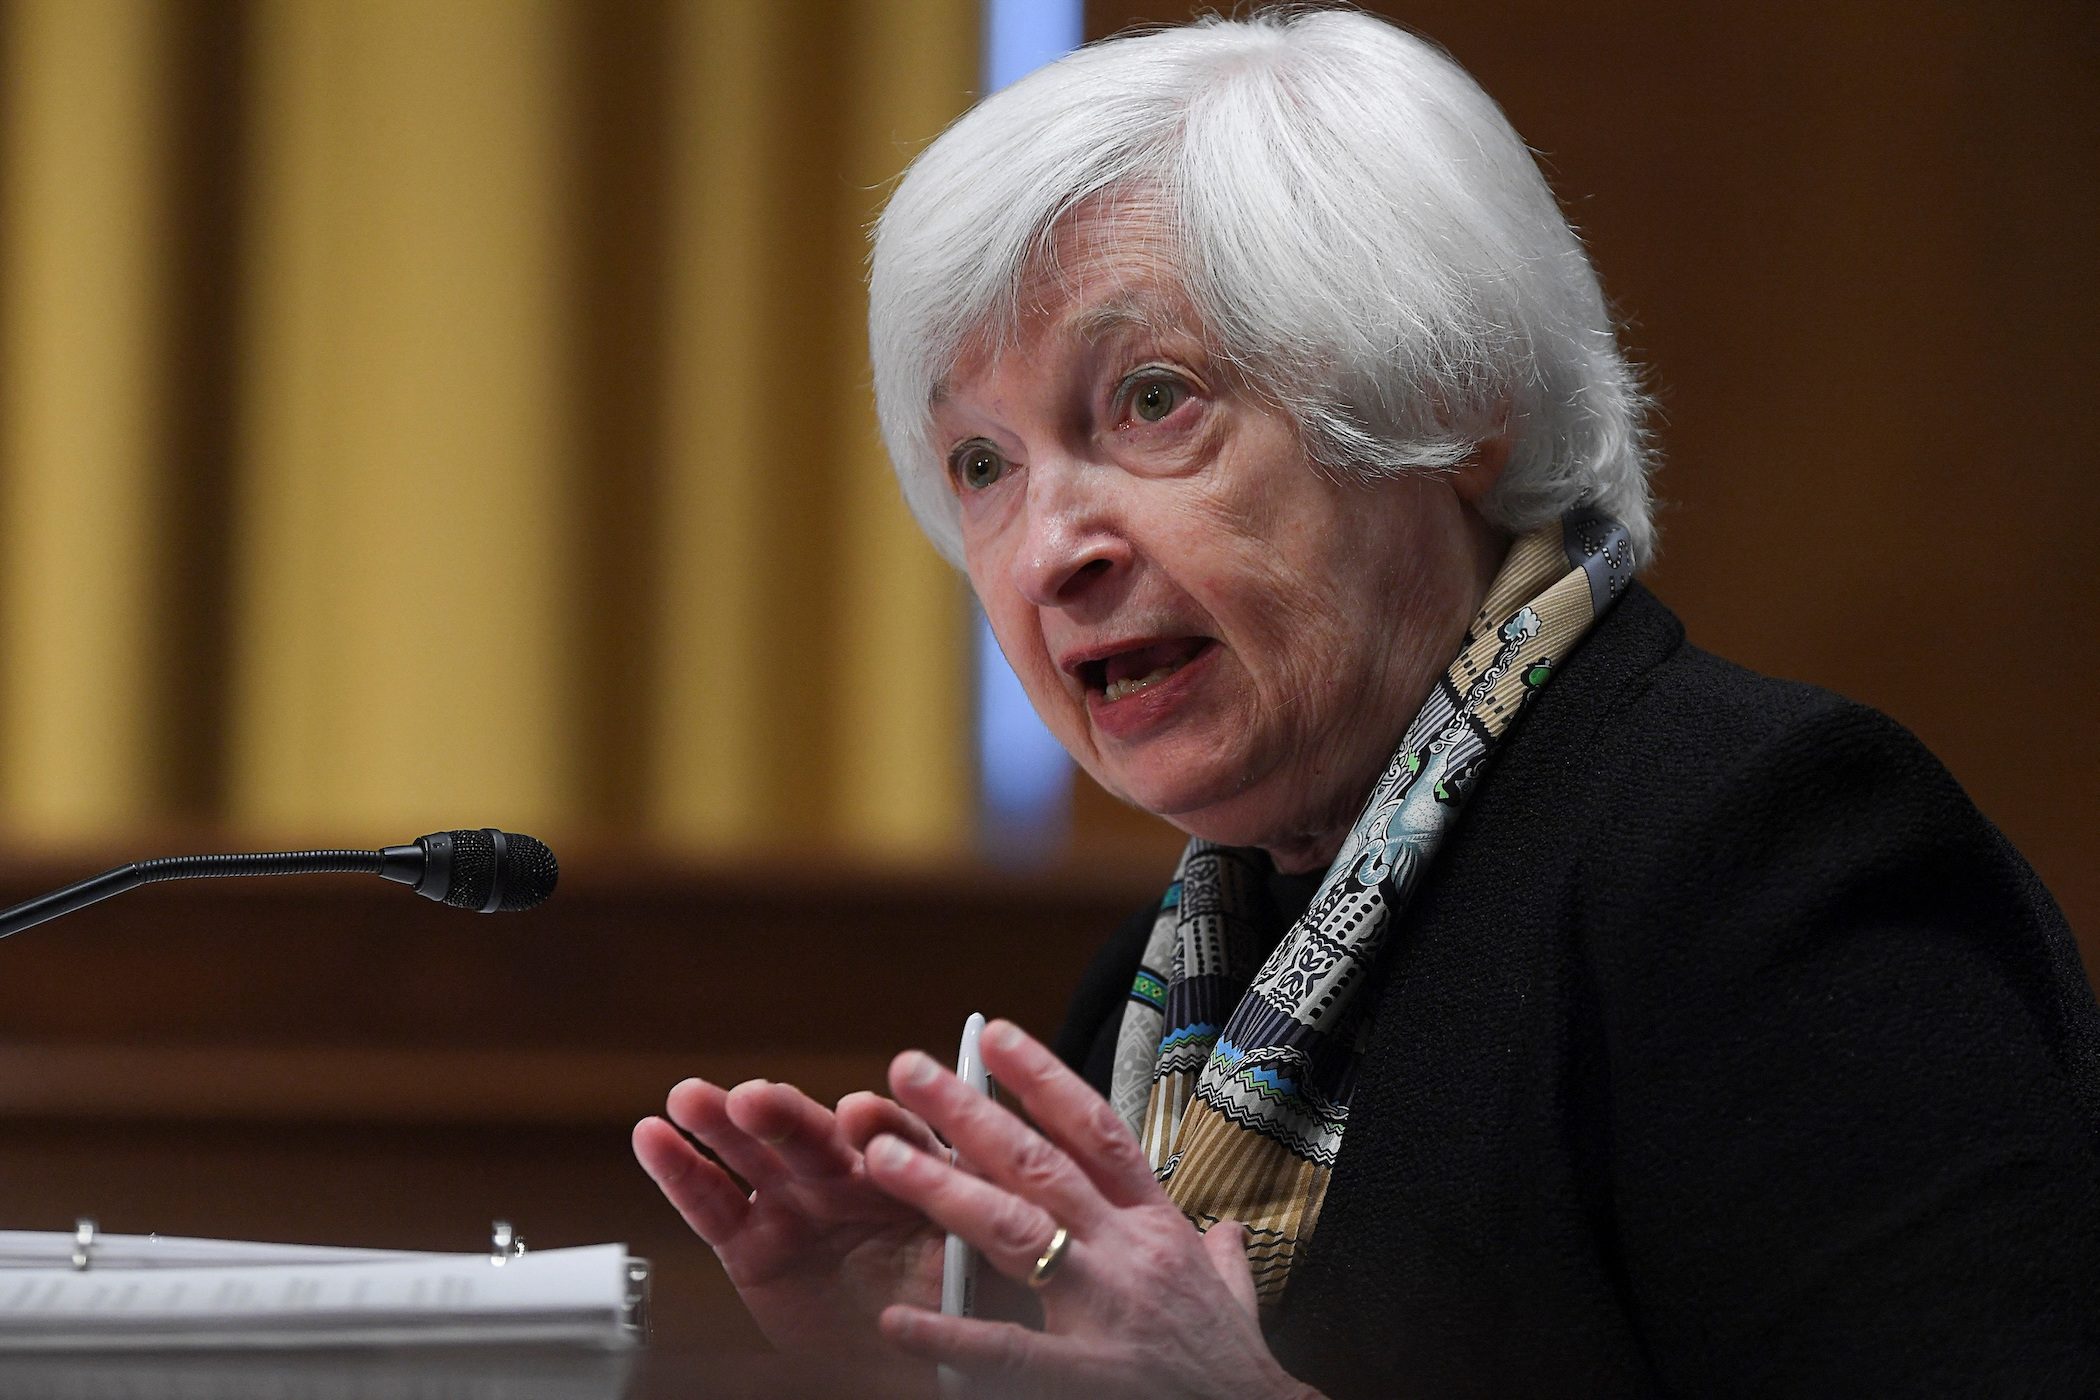 US banking system sound but not all deposits guaranteed, Yellen says